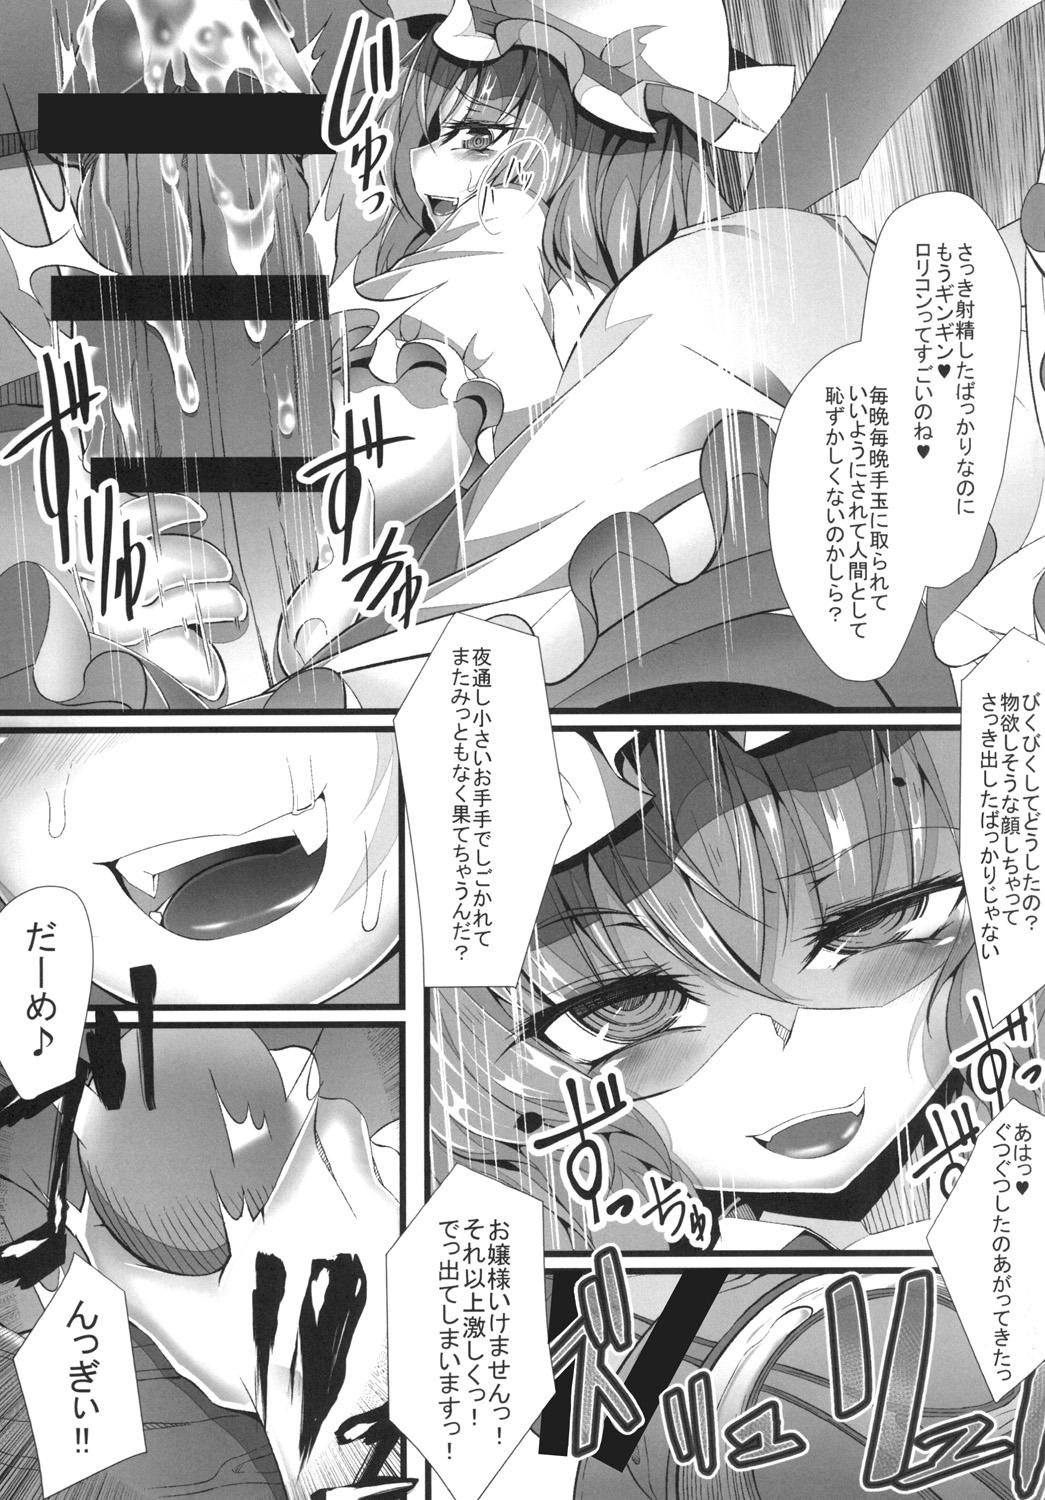 Movies M.P. Vol. 9 - Touhou project Submissive - Page 7